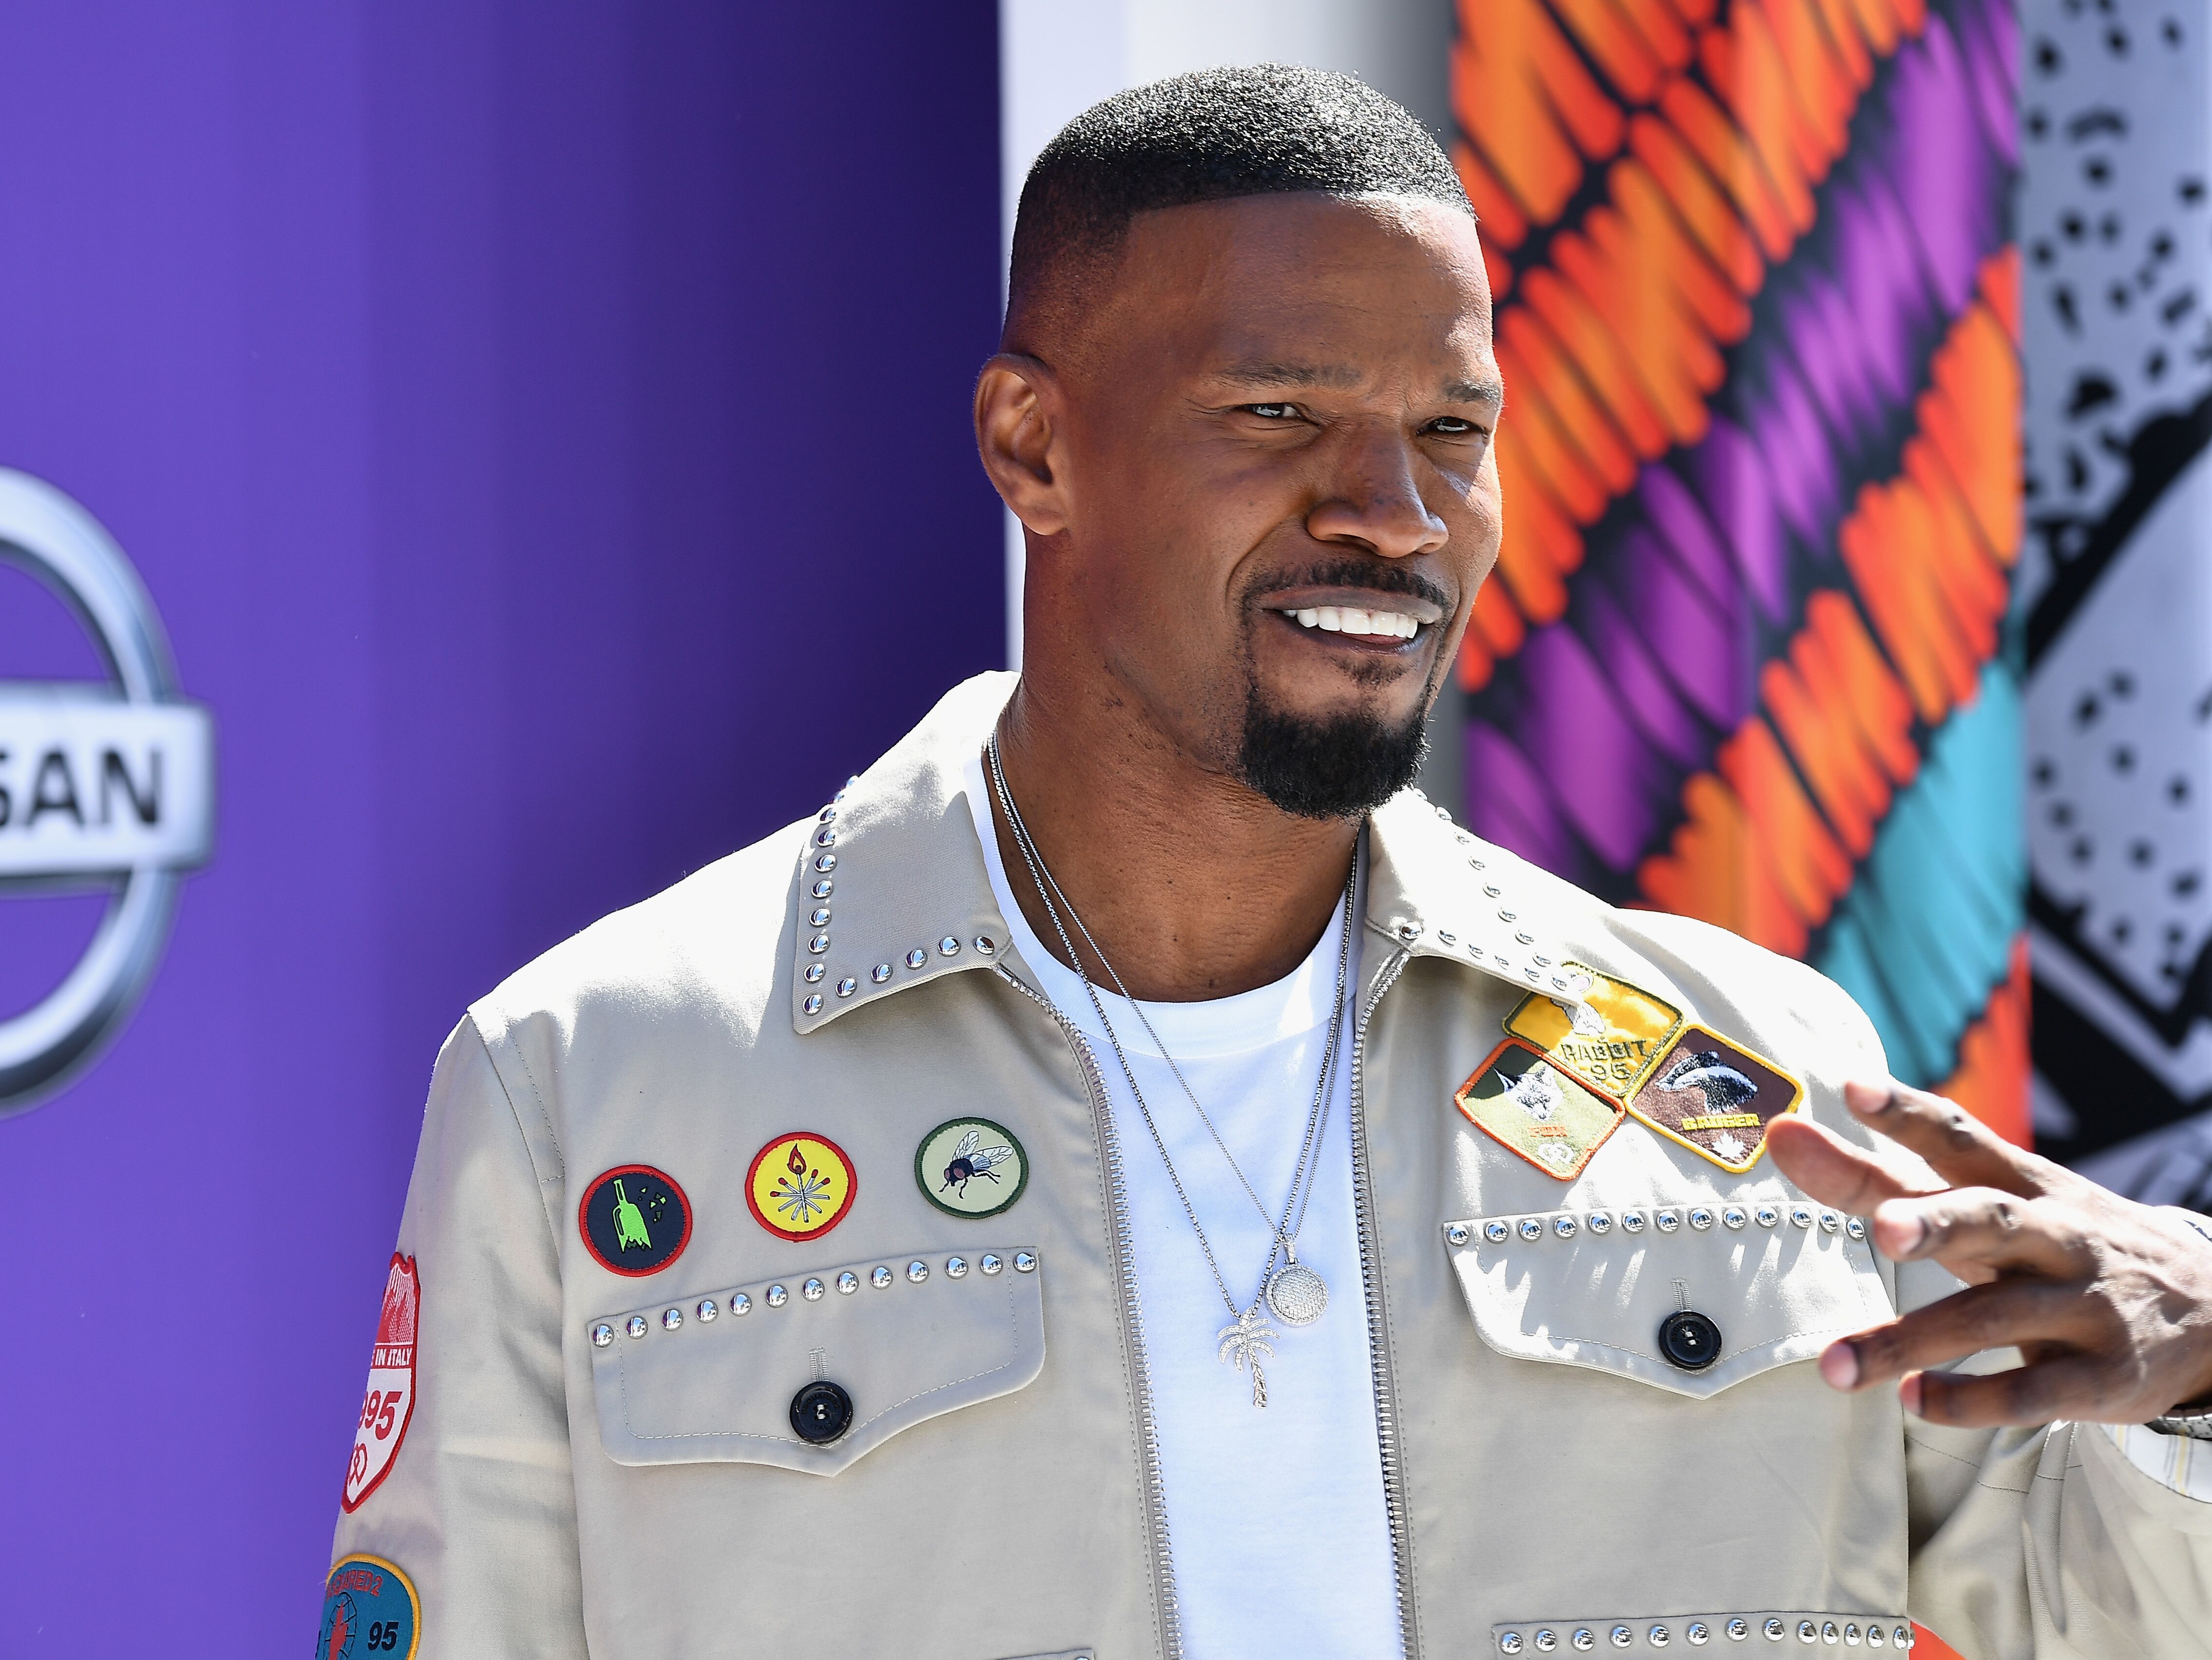 Jamie Foxx attends the 2018 BET Awards at Microsoft Theater | Photo: Getty Images